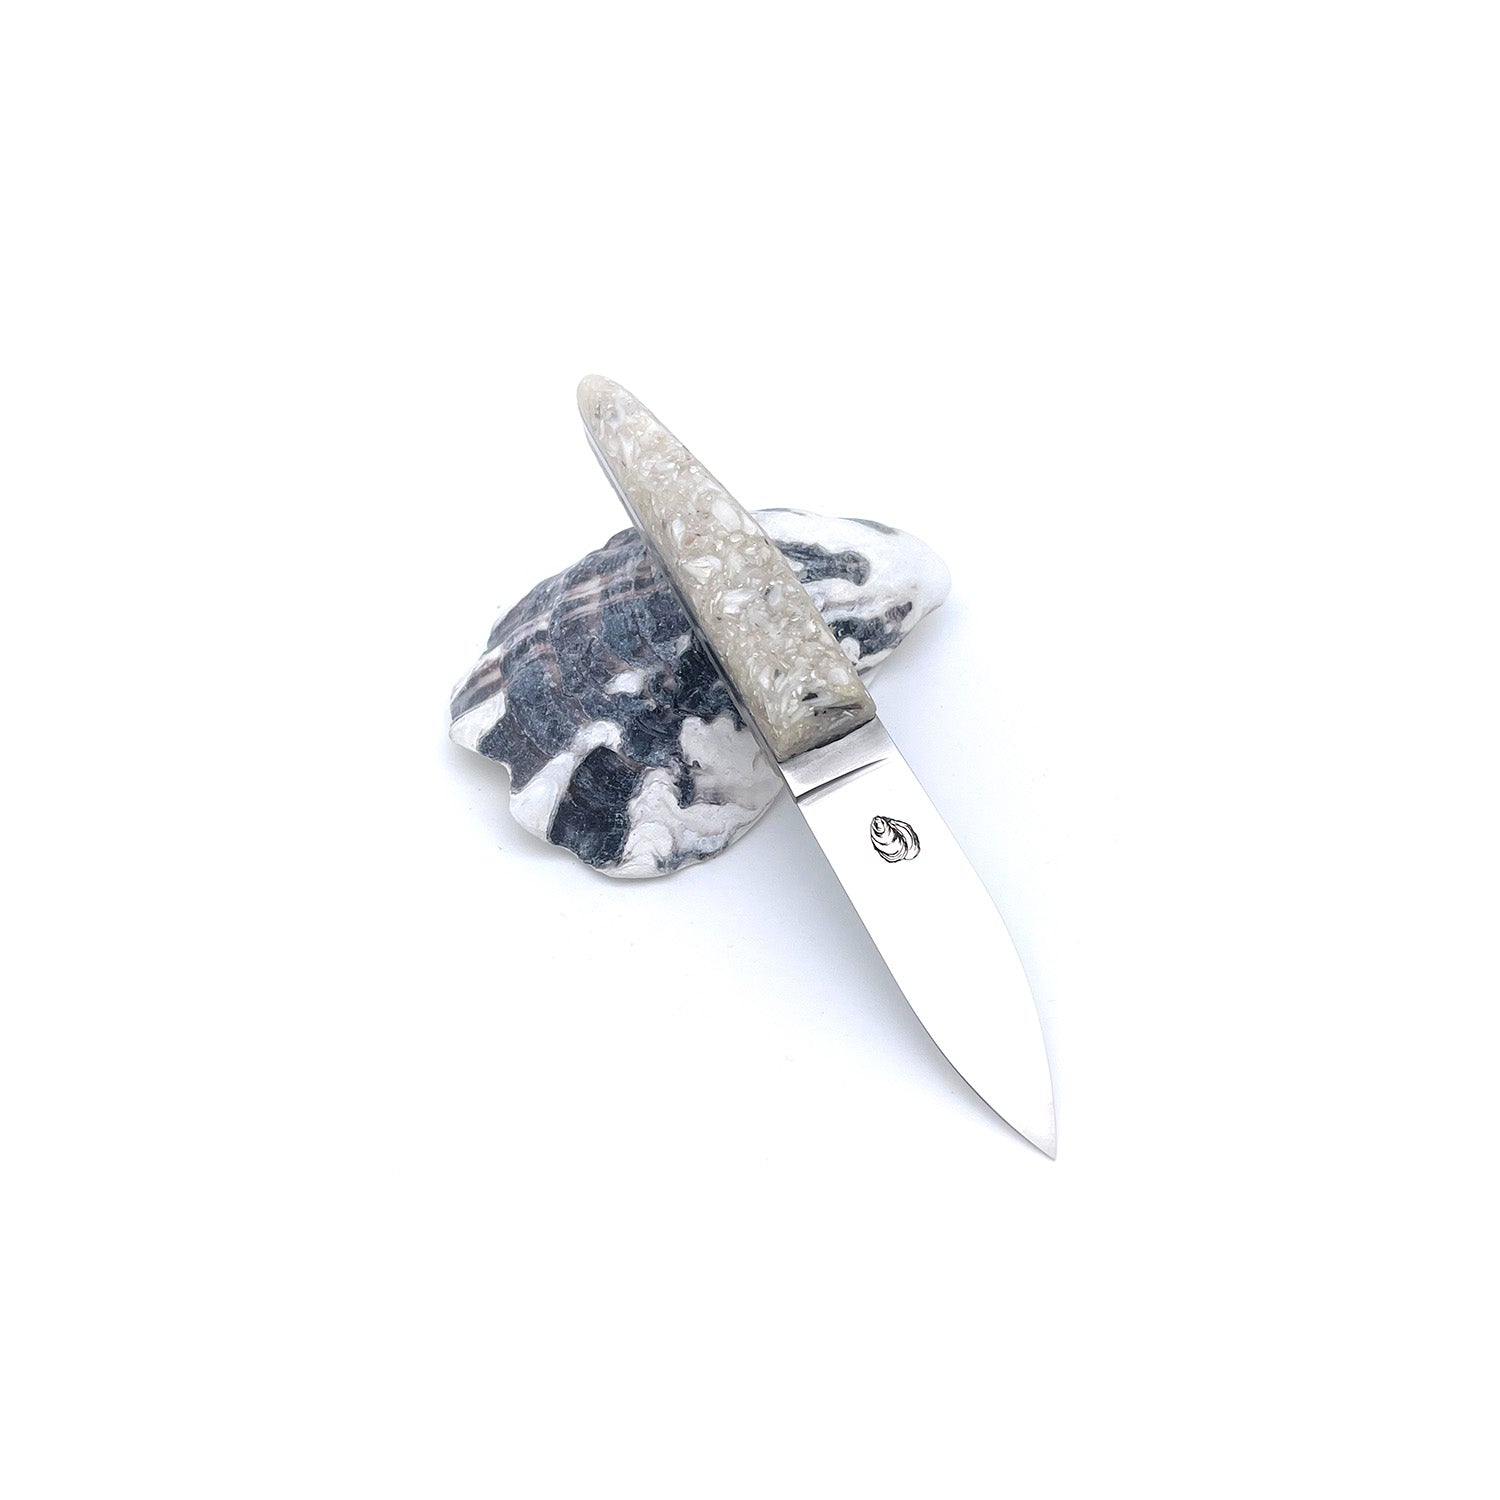 Small cutter with a handle made from recycled oyster shells